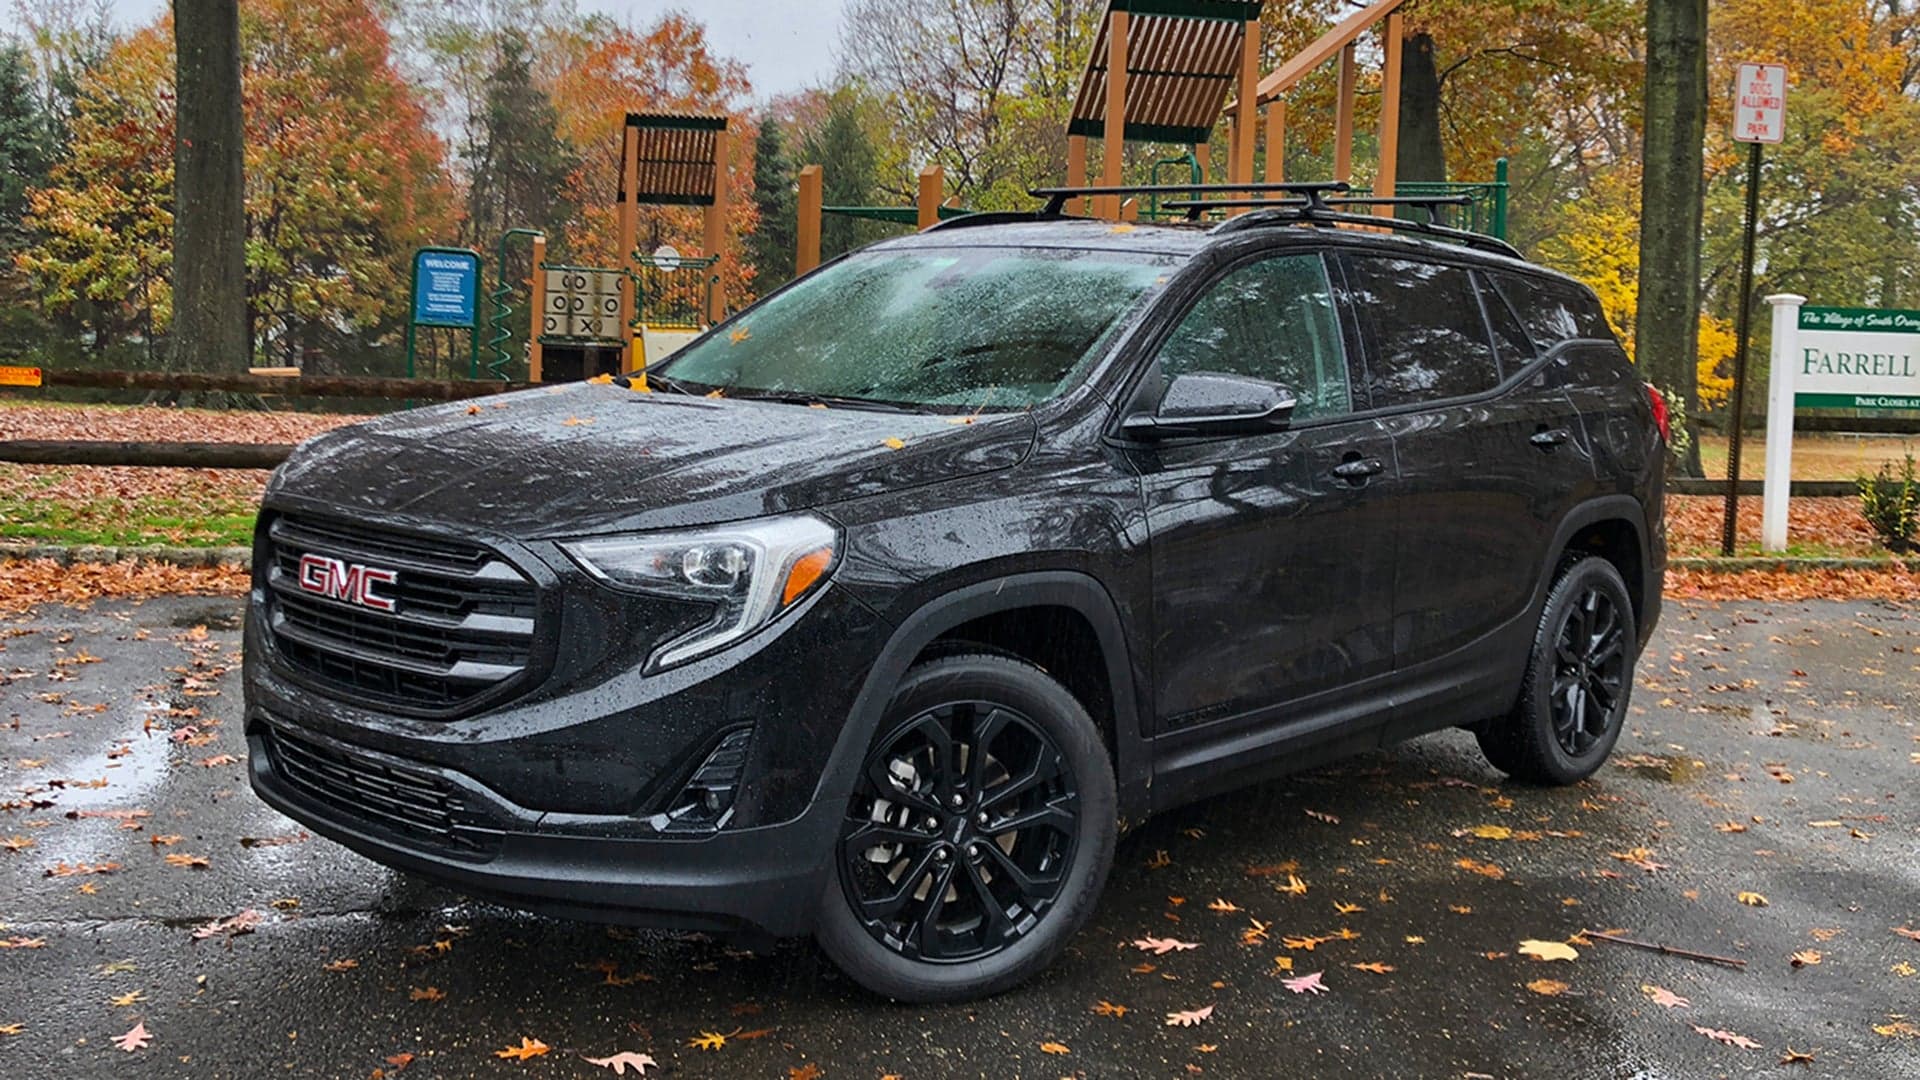 2019 GMC Terrain SLT Black Edition Review: All Black Everything in a Compact Crossover Package